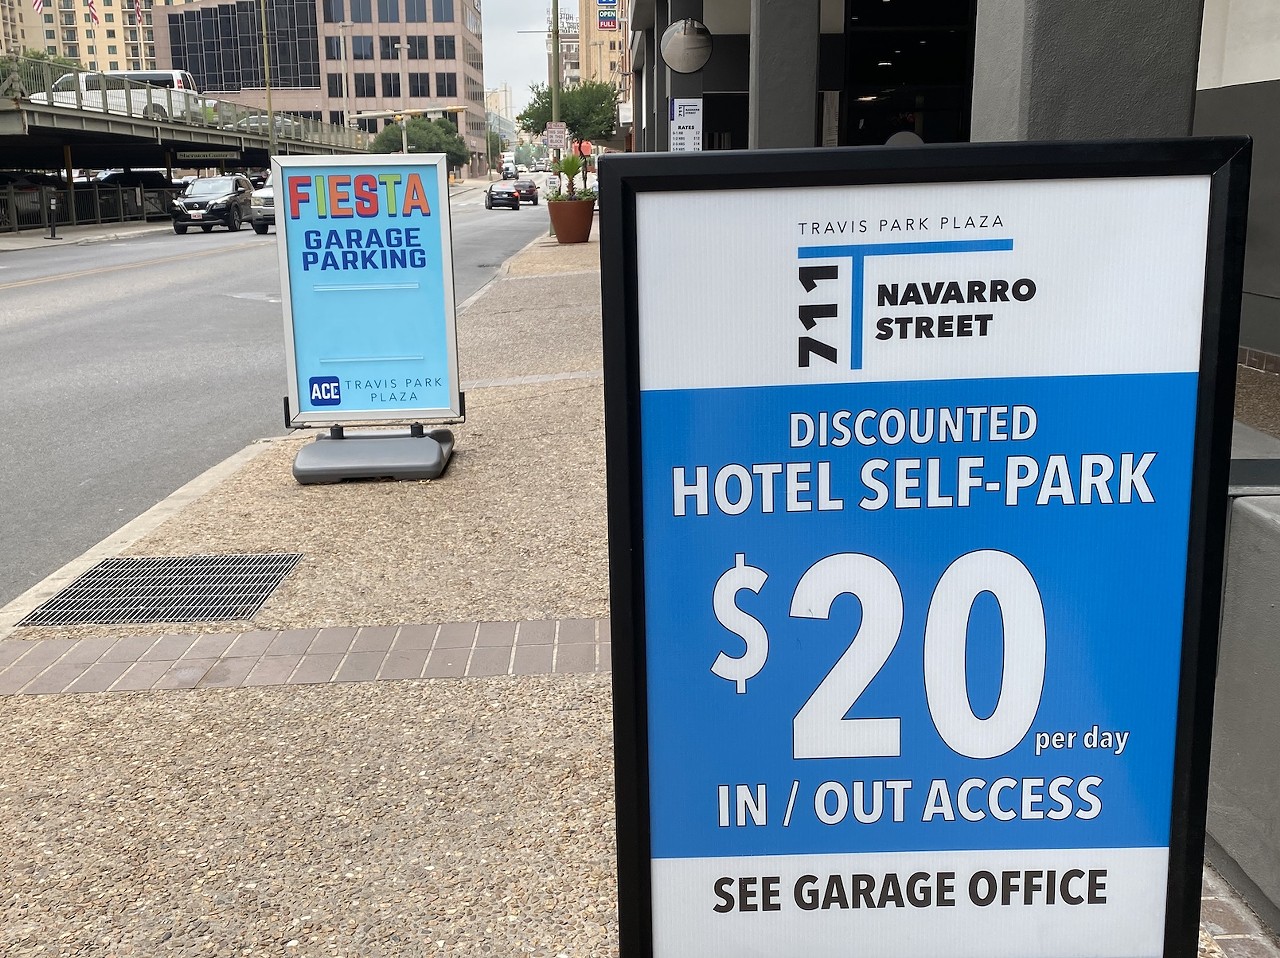 Assume you can find parking downtown — at least parking that doesn't cost a fortune.